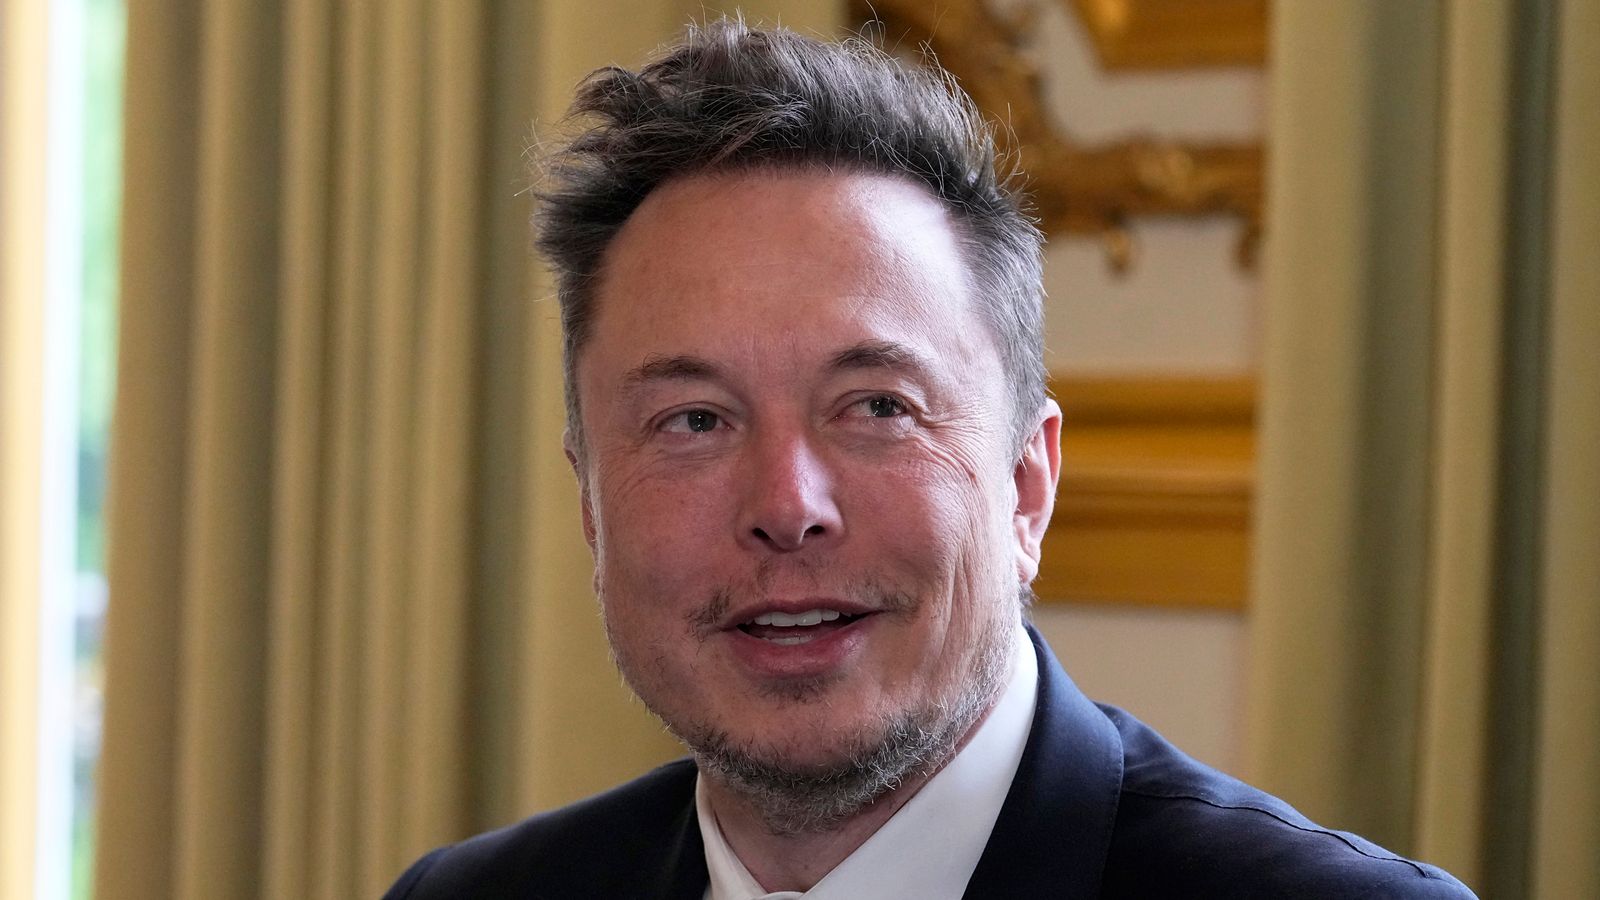 Elon Musk jokes about Twitter's new reading limits after users vent fury